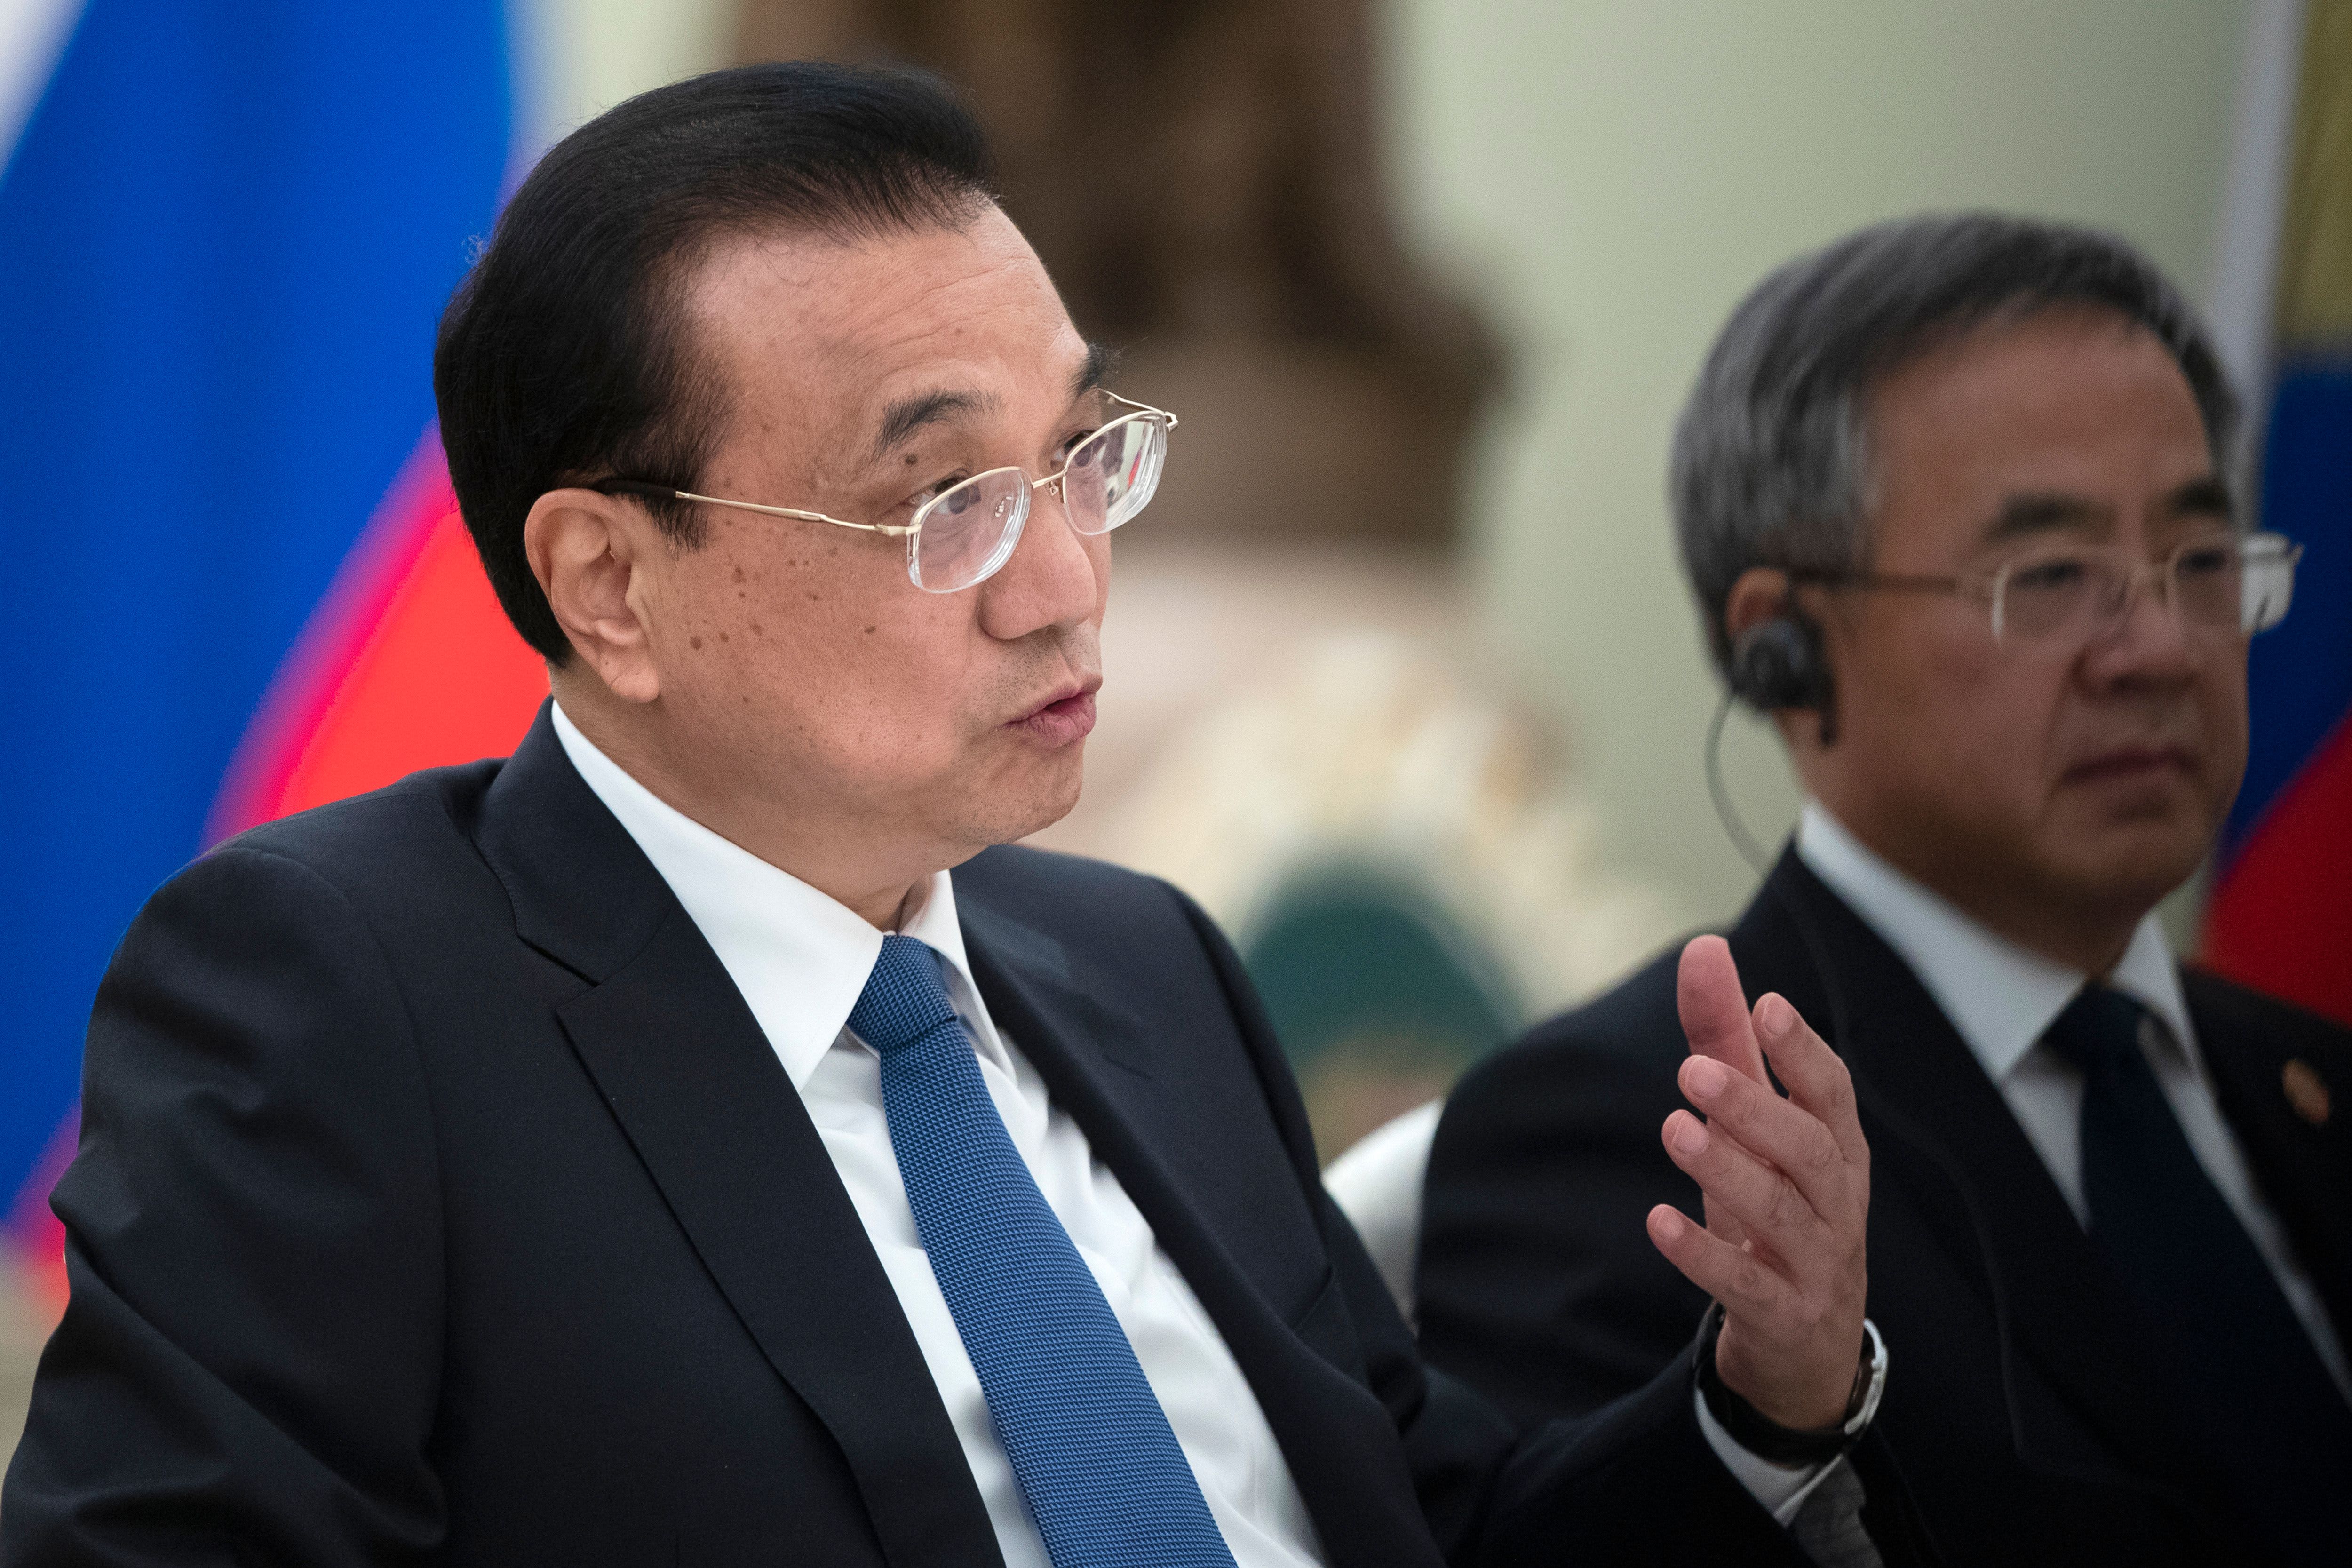 China is ‘deeply’ worried about Ukraine crisis, Premier Li Keqiang says